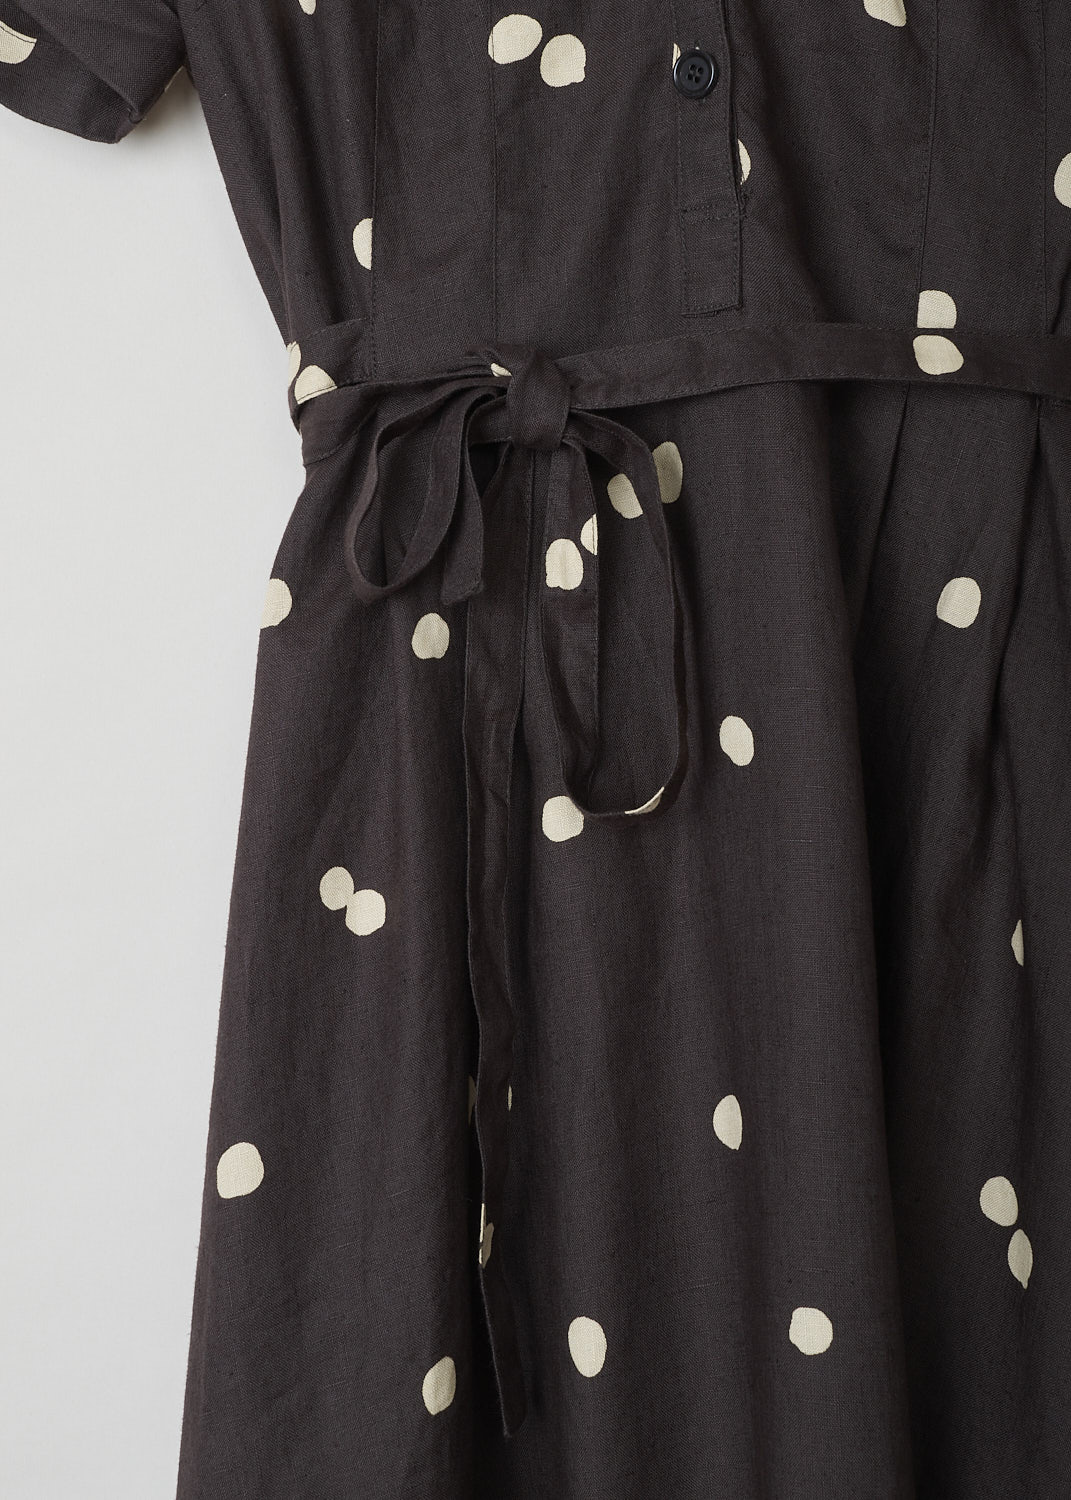 ASPESI, BROWN LINEN MAXI DRESS WITH DOTTED PRINT, 2958_M277_62331, Brown, Print, Detail, This chocolate brown linen dress has a off-white dotted print throughout. The dress has a modest V-neckline and w three-button closure in the front. The dress has short sleeves with rolled cuffs. An attached belt can be used to cinch in the waist. A concealed side zip functions as the closure option. Slanted pockets re concealed in the side seam. The dress has a straight hemline.
